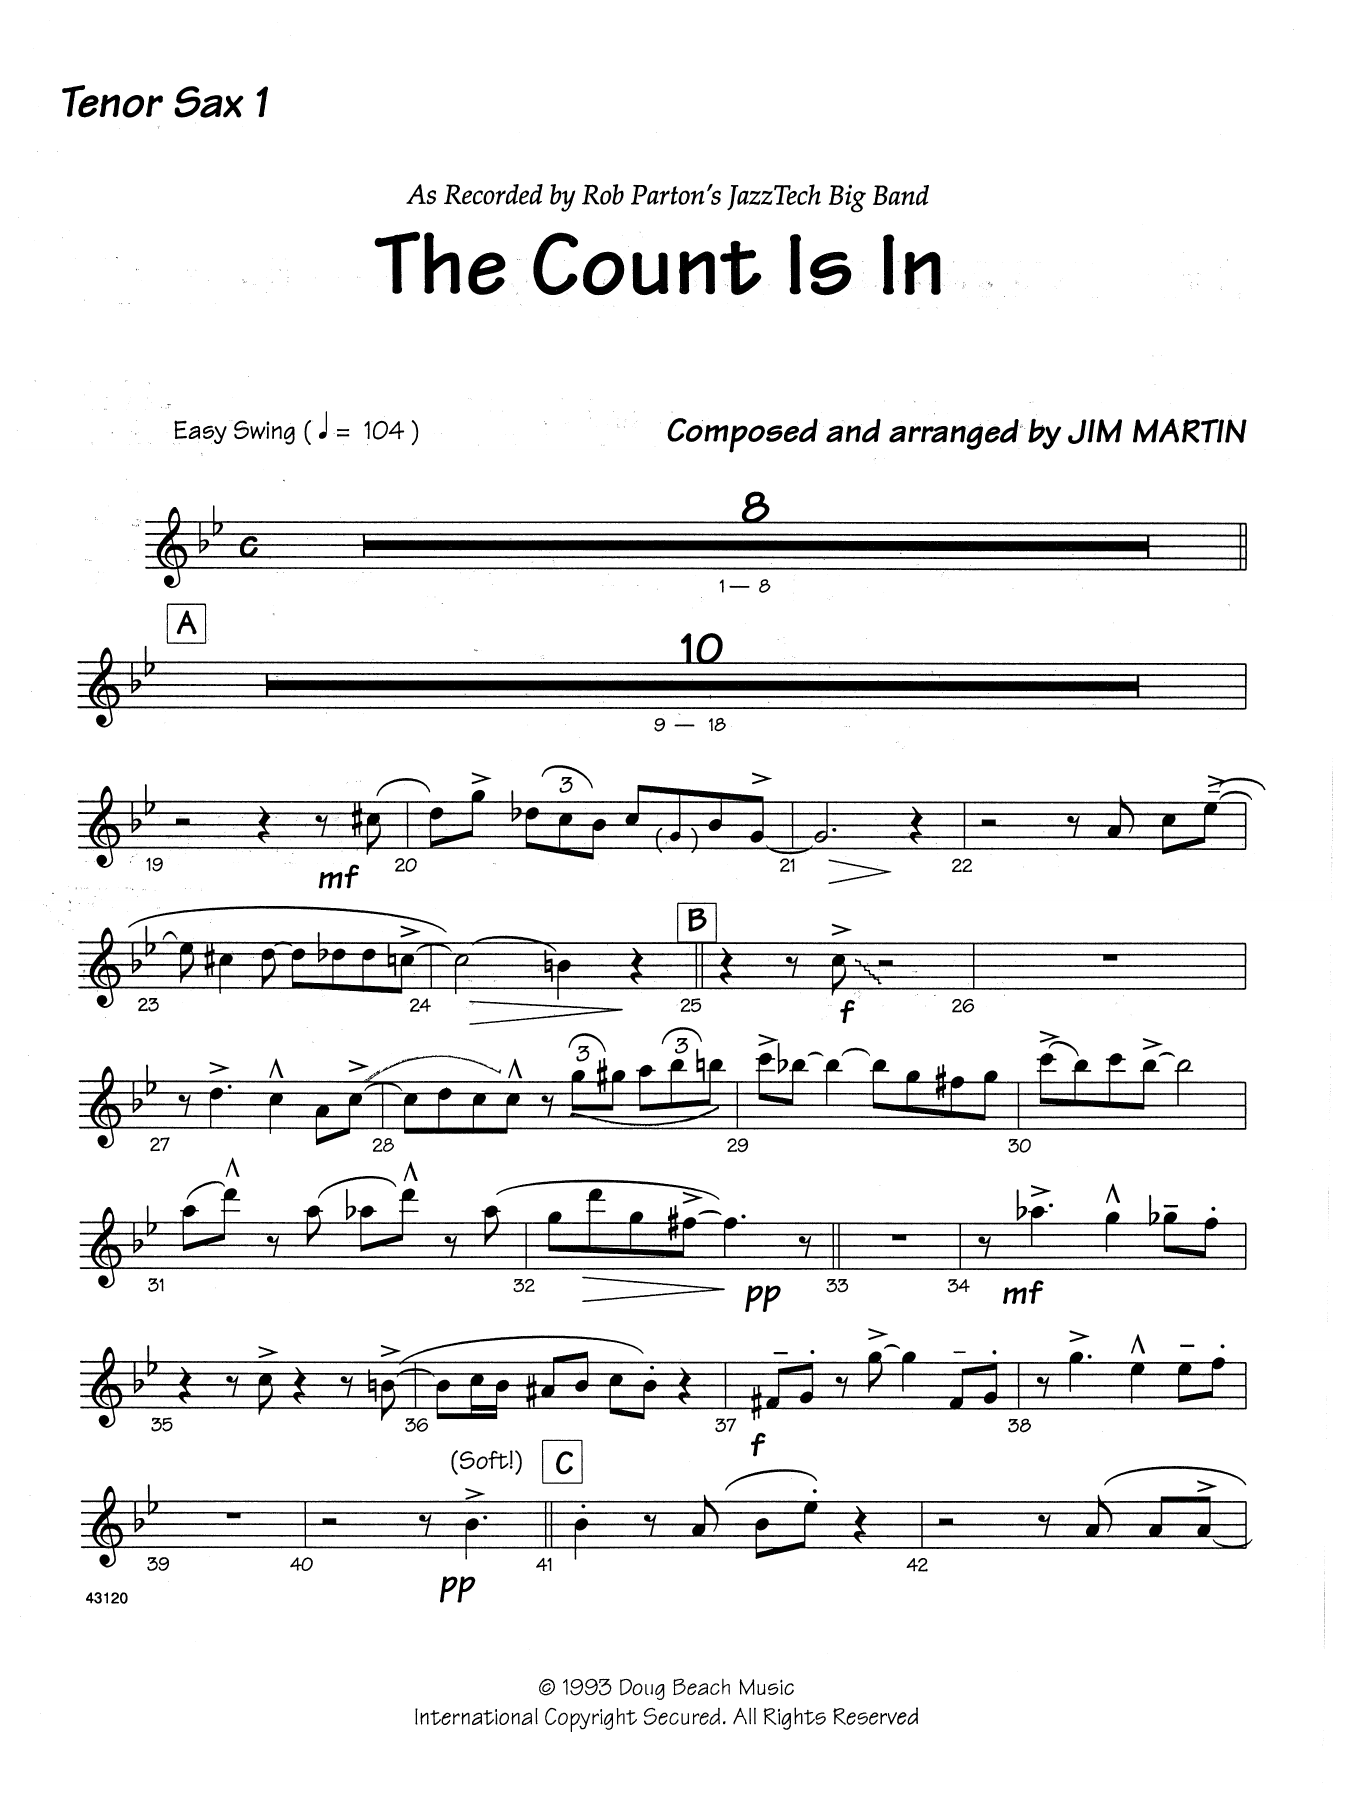 Download Martin The Count Is In - 1st Tenor Saxophone Sheet Music